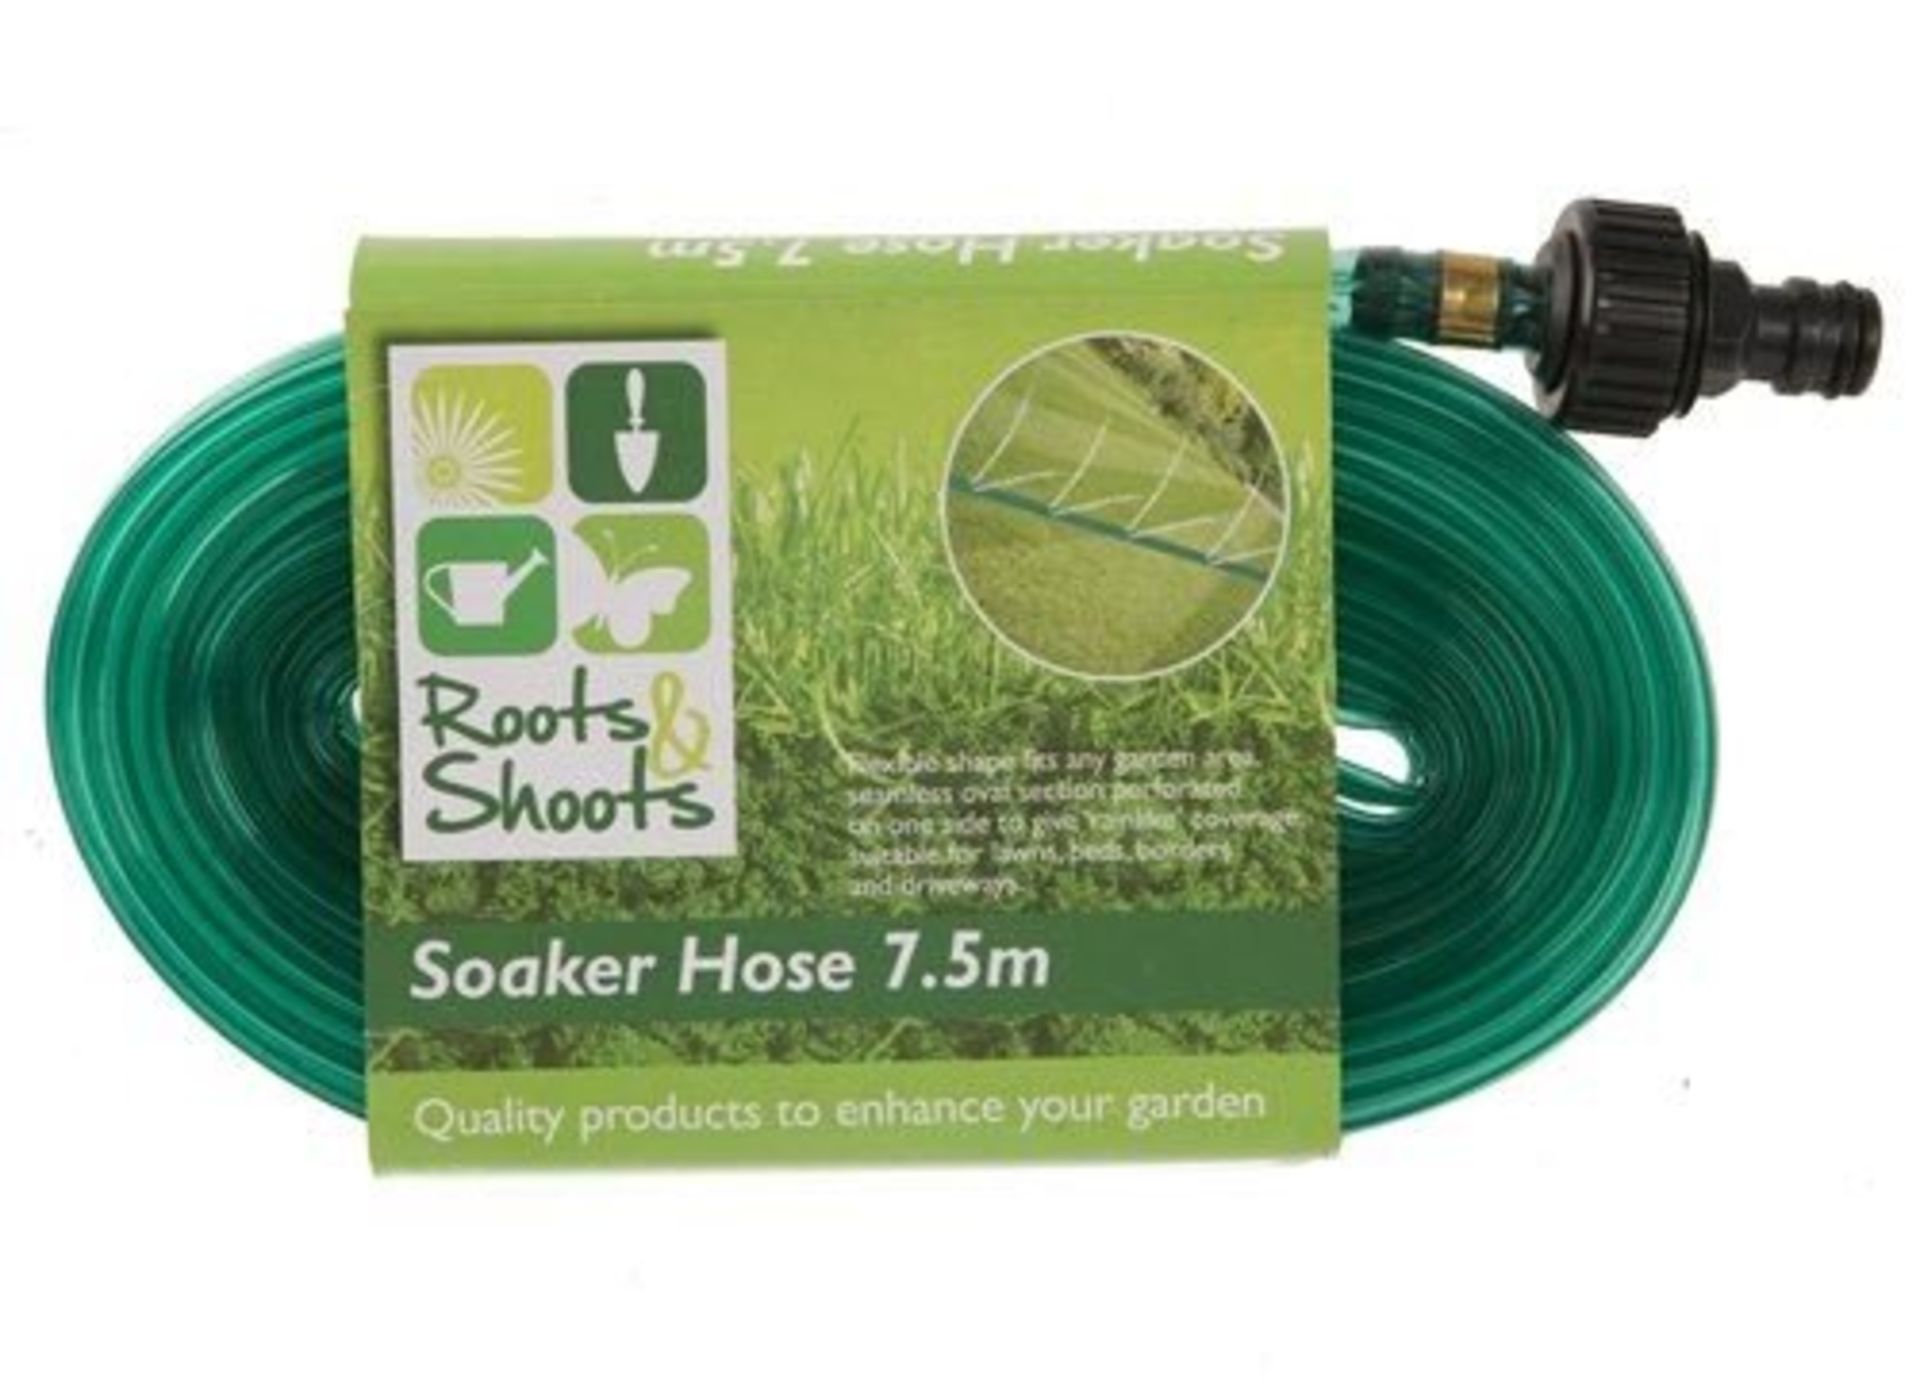 V Brand New 7.5 Metre Soaker Hose Oval Hose Perforated On One side To Give Rainlike Coverage X 2